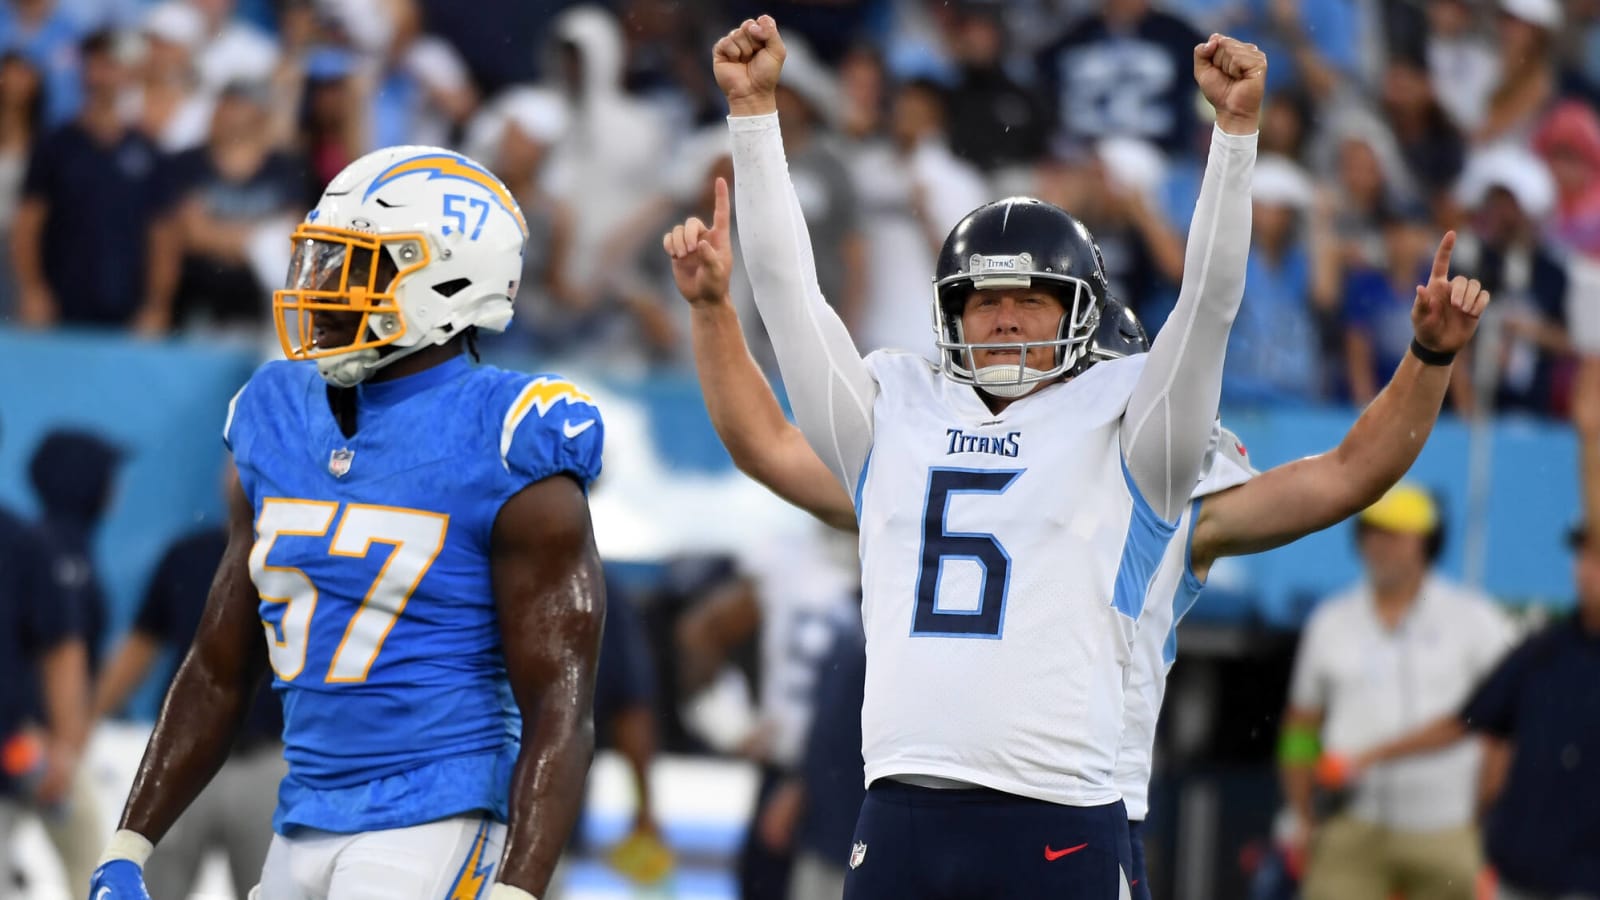 NFL Week 3: Tennessee Titans vs. Cleveland Browns betting picks, preview